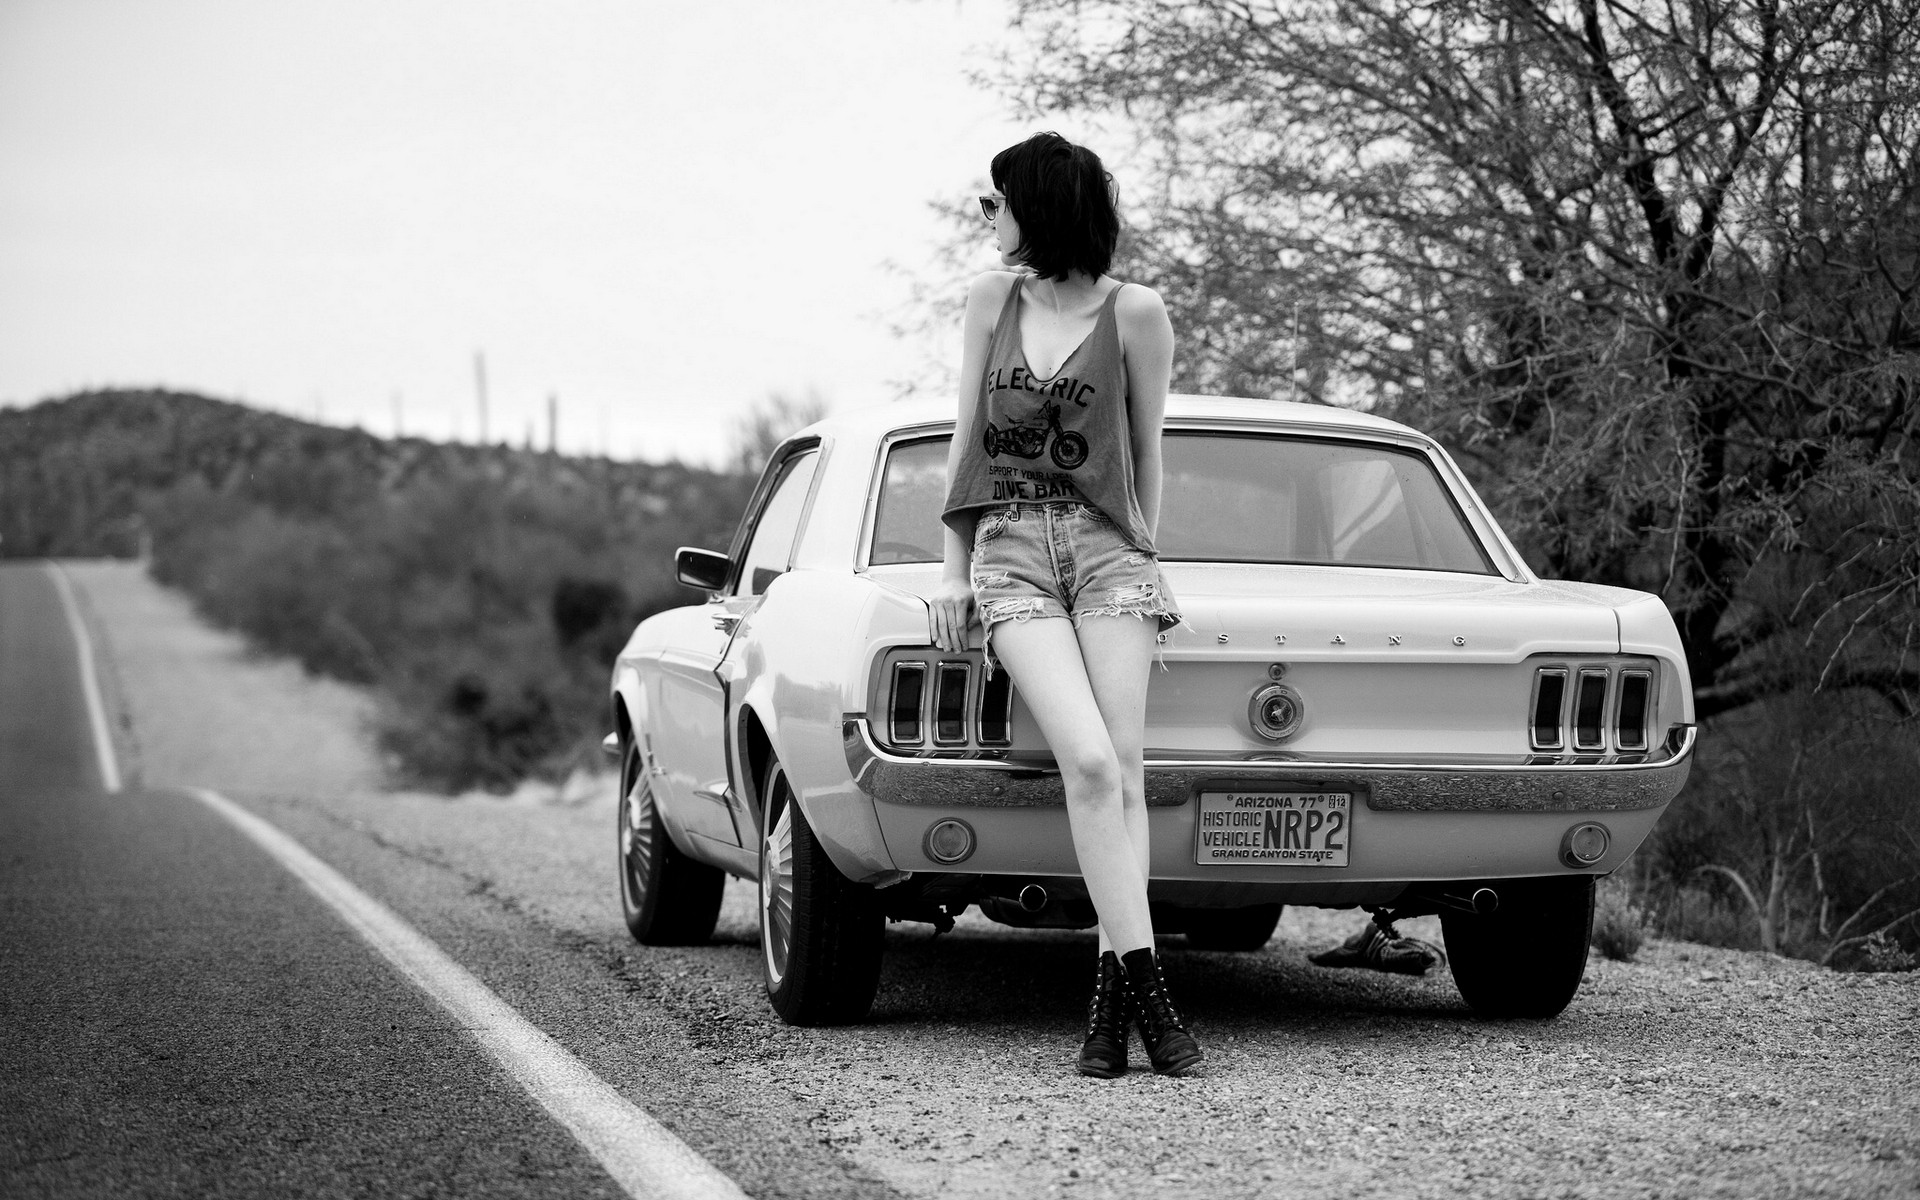 People 1920x1200 monochrome women with cars Ford Mustang jean shorts road looking away women with shades women outdoors car vehicle Ford women muscle cars American cars